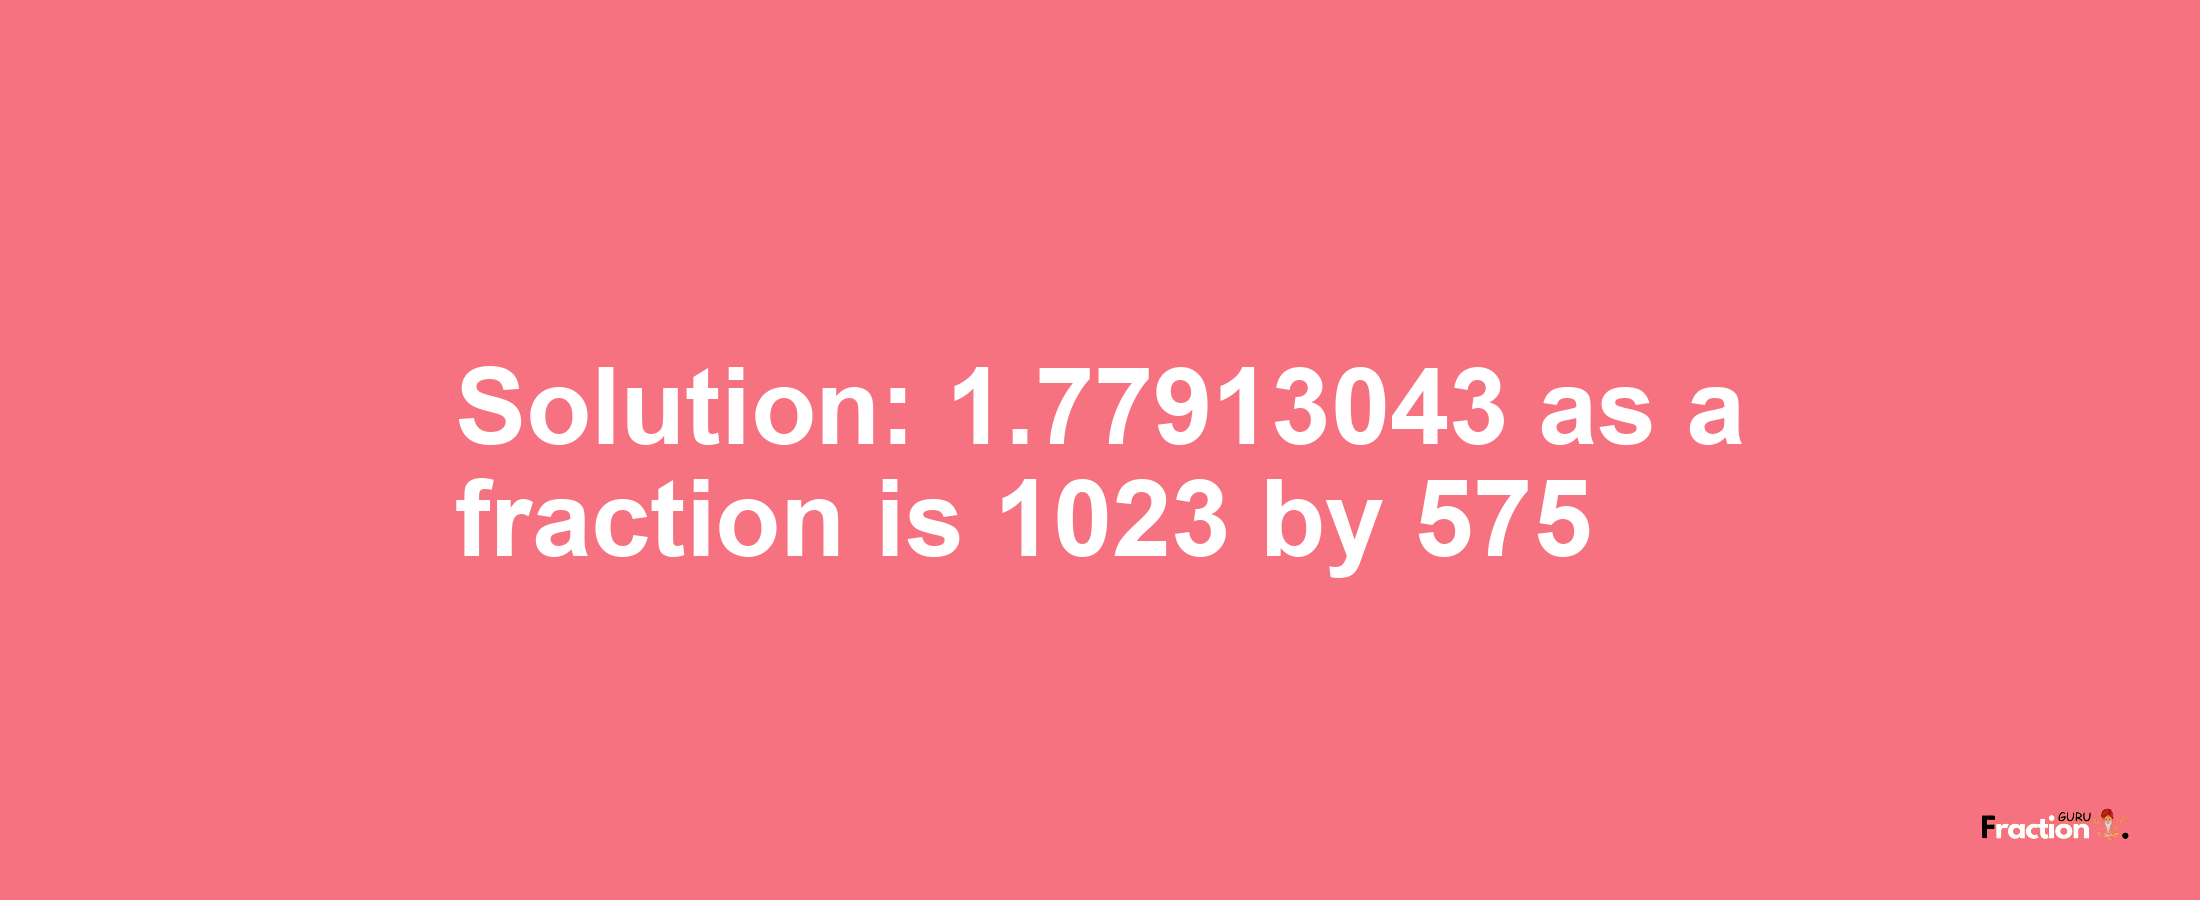 Solution:1.77913043 as a fraction is 1023/575